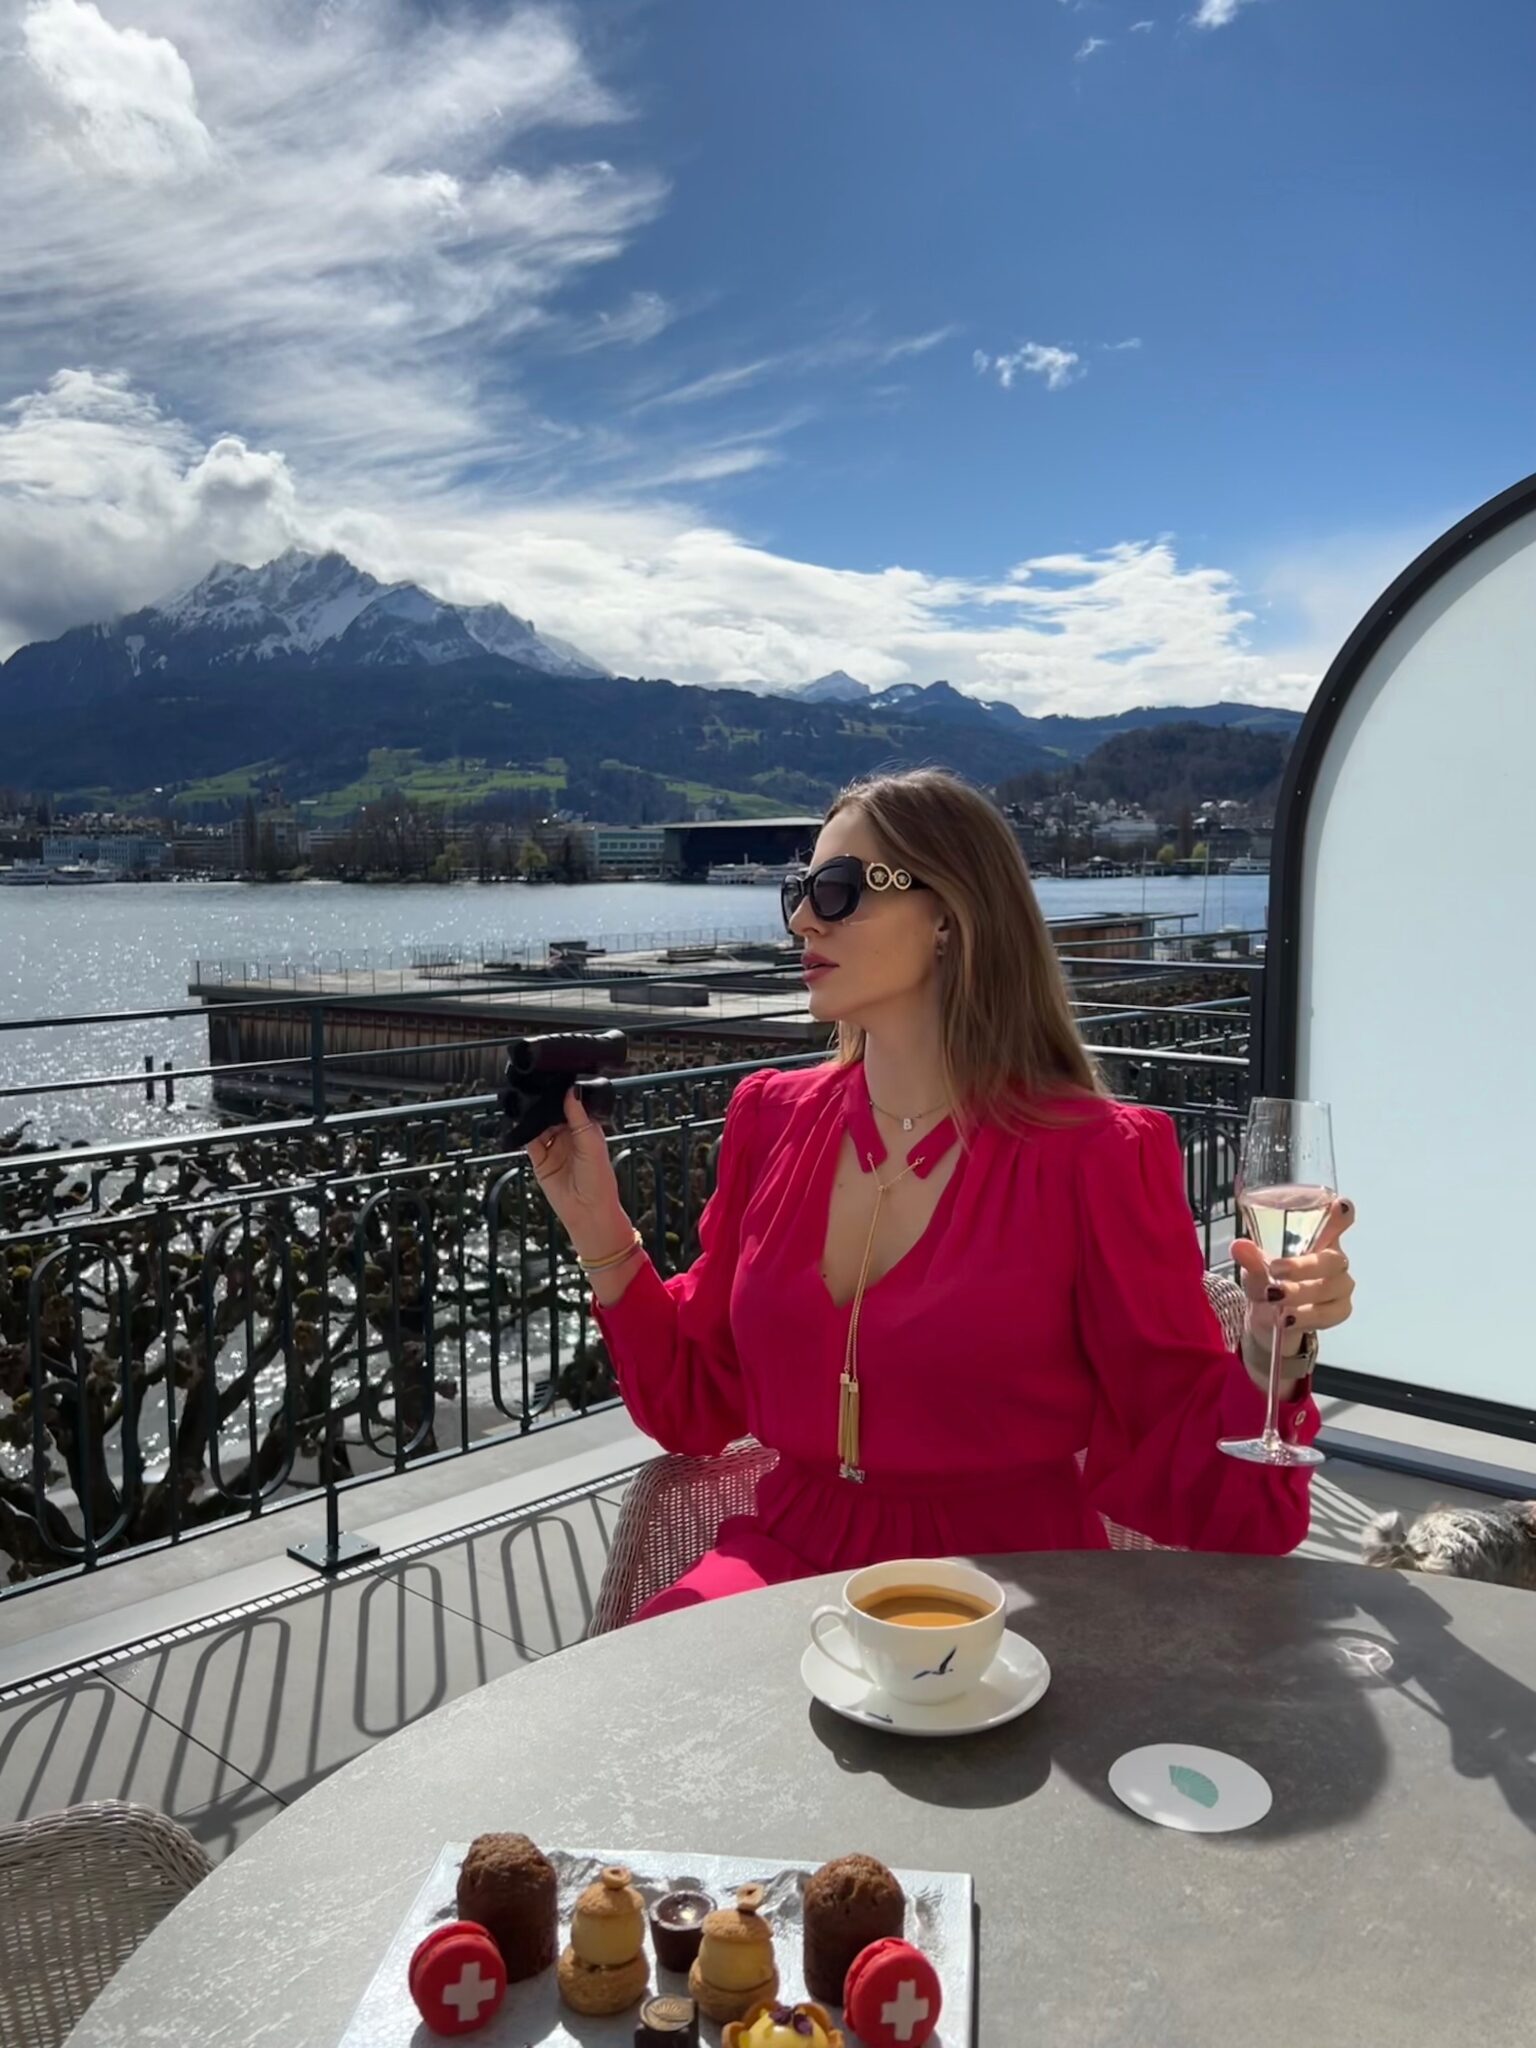 Mandarin Oriental Palace Luzern. A Historic Belle Epoque Palace reopened in 2022. /A magnificent hotel with a panoramic view of Lake Lucerne./ 37